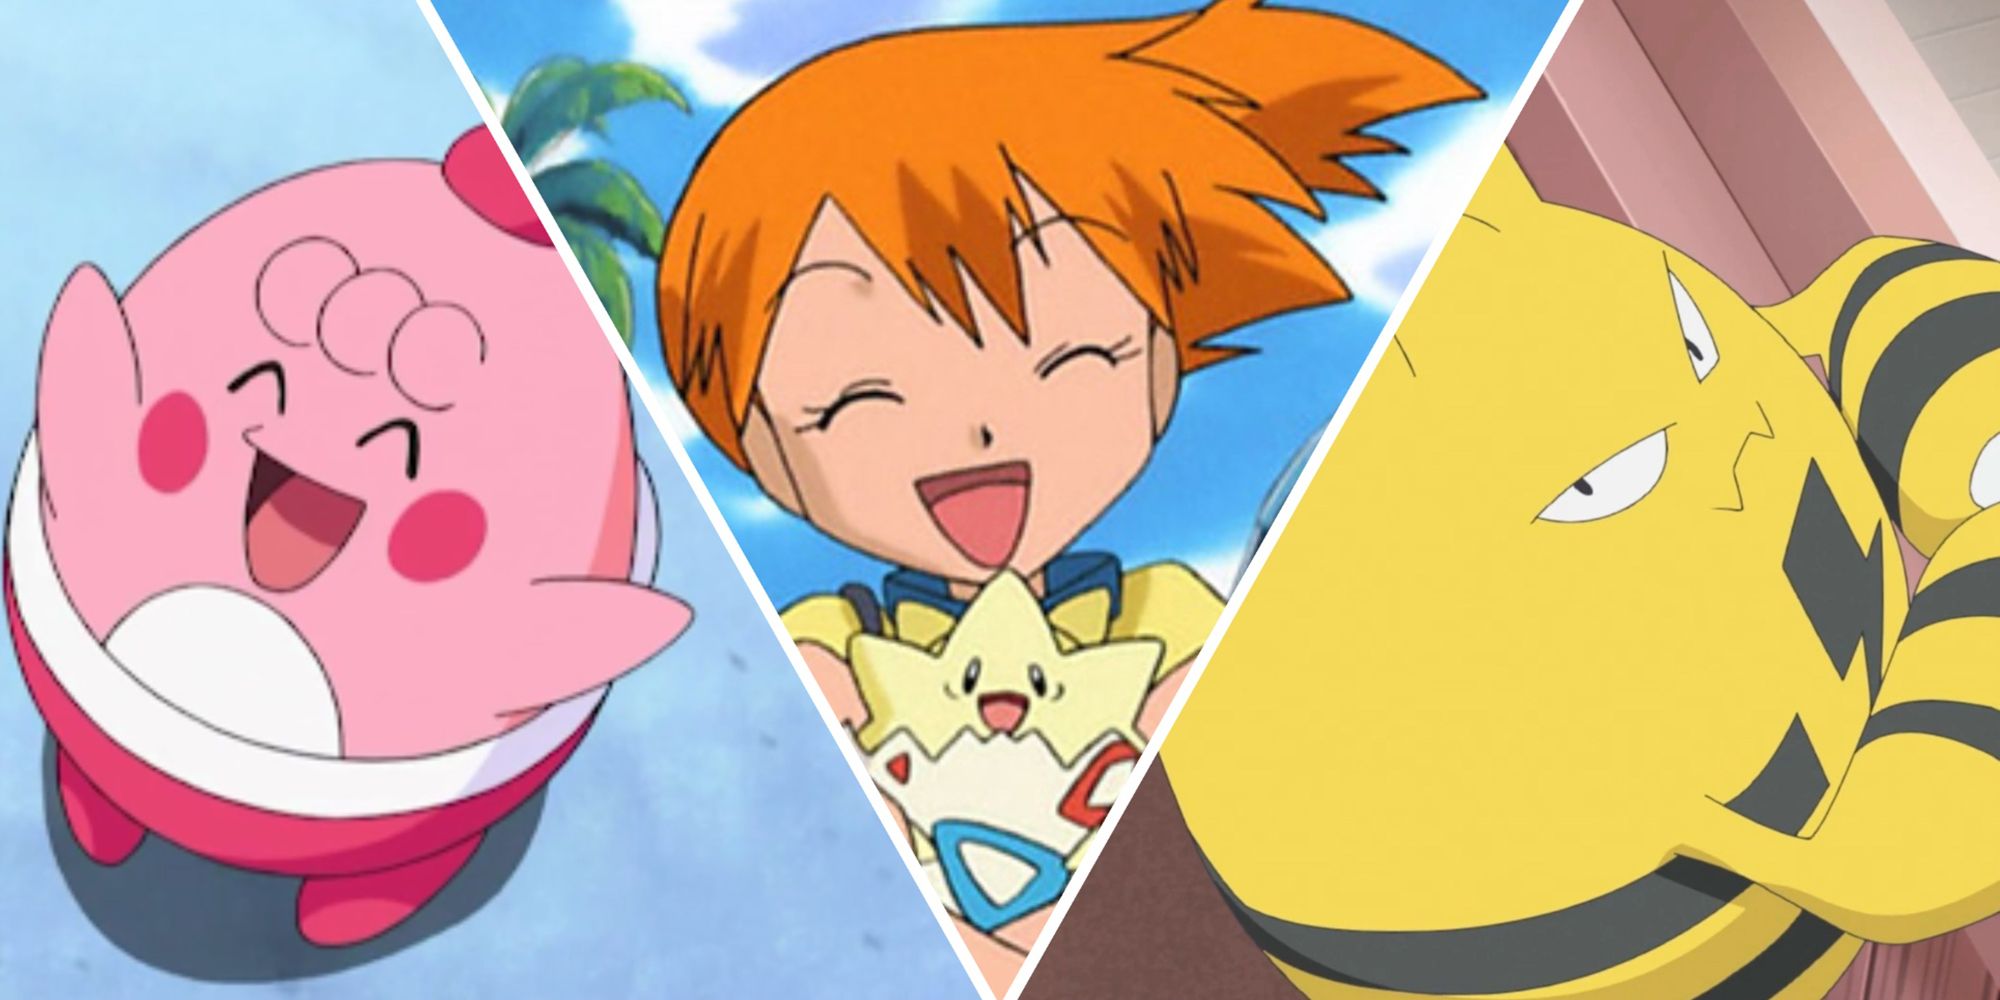 Split image of three baby Pokemon with Misty holding Togepi in the center